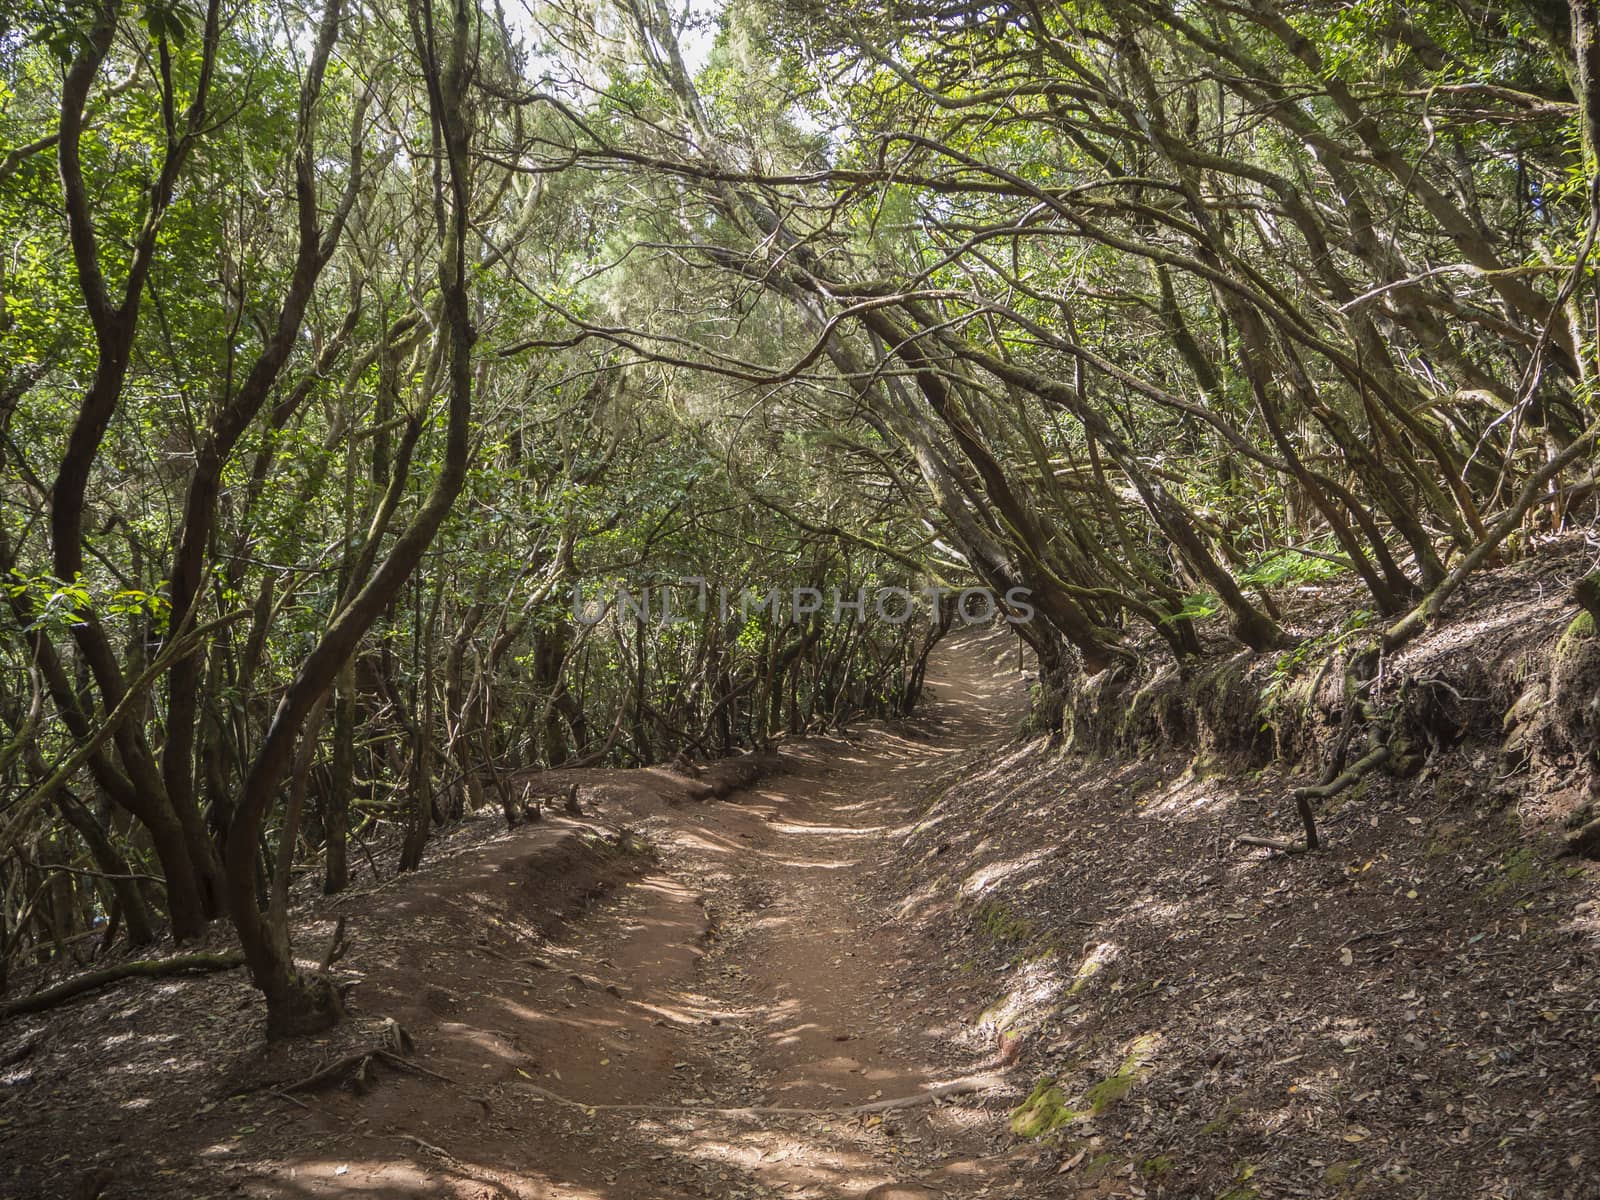 narrow footpath on Sendero de los Sentidos path od the senses in mystery primary Laurel forest Laurisilva rainforest with old green mossed tree and in anaga mountain, tenerife  canary island spain